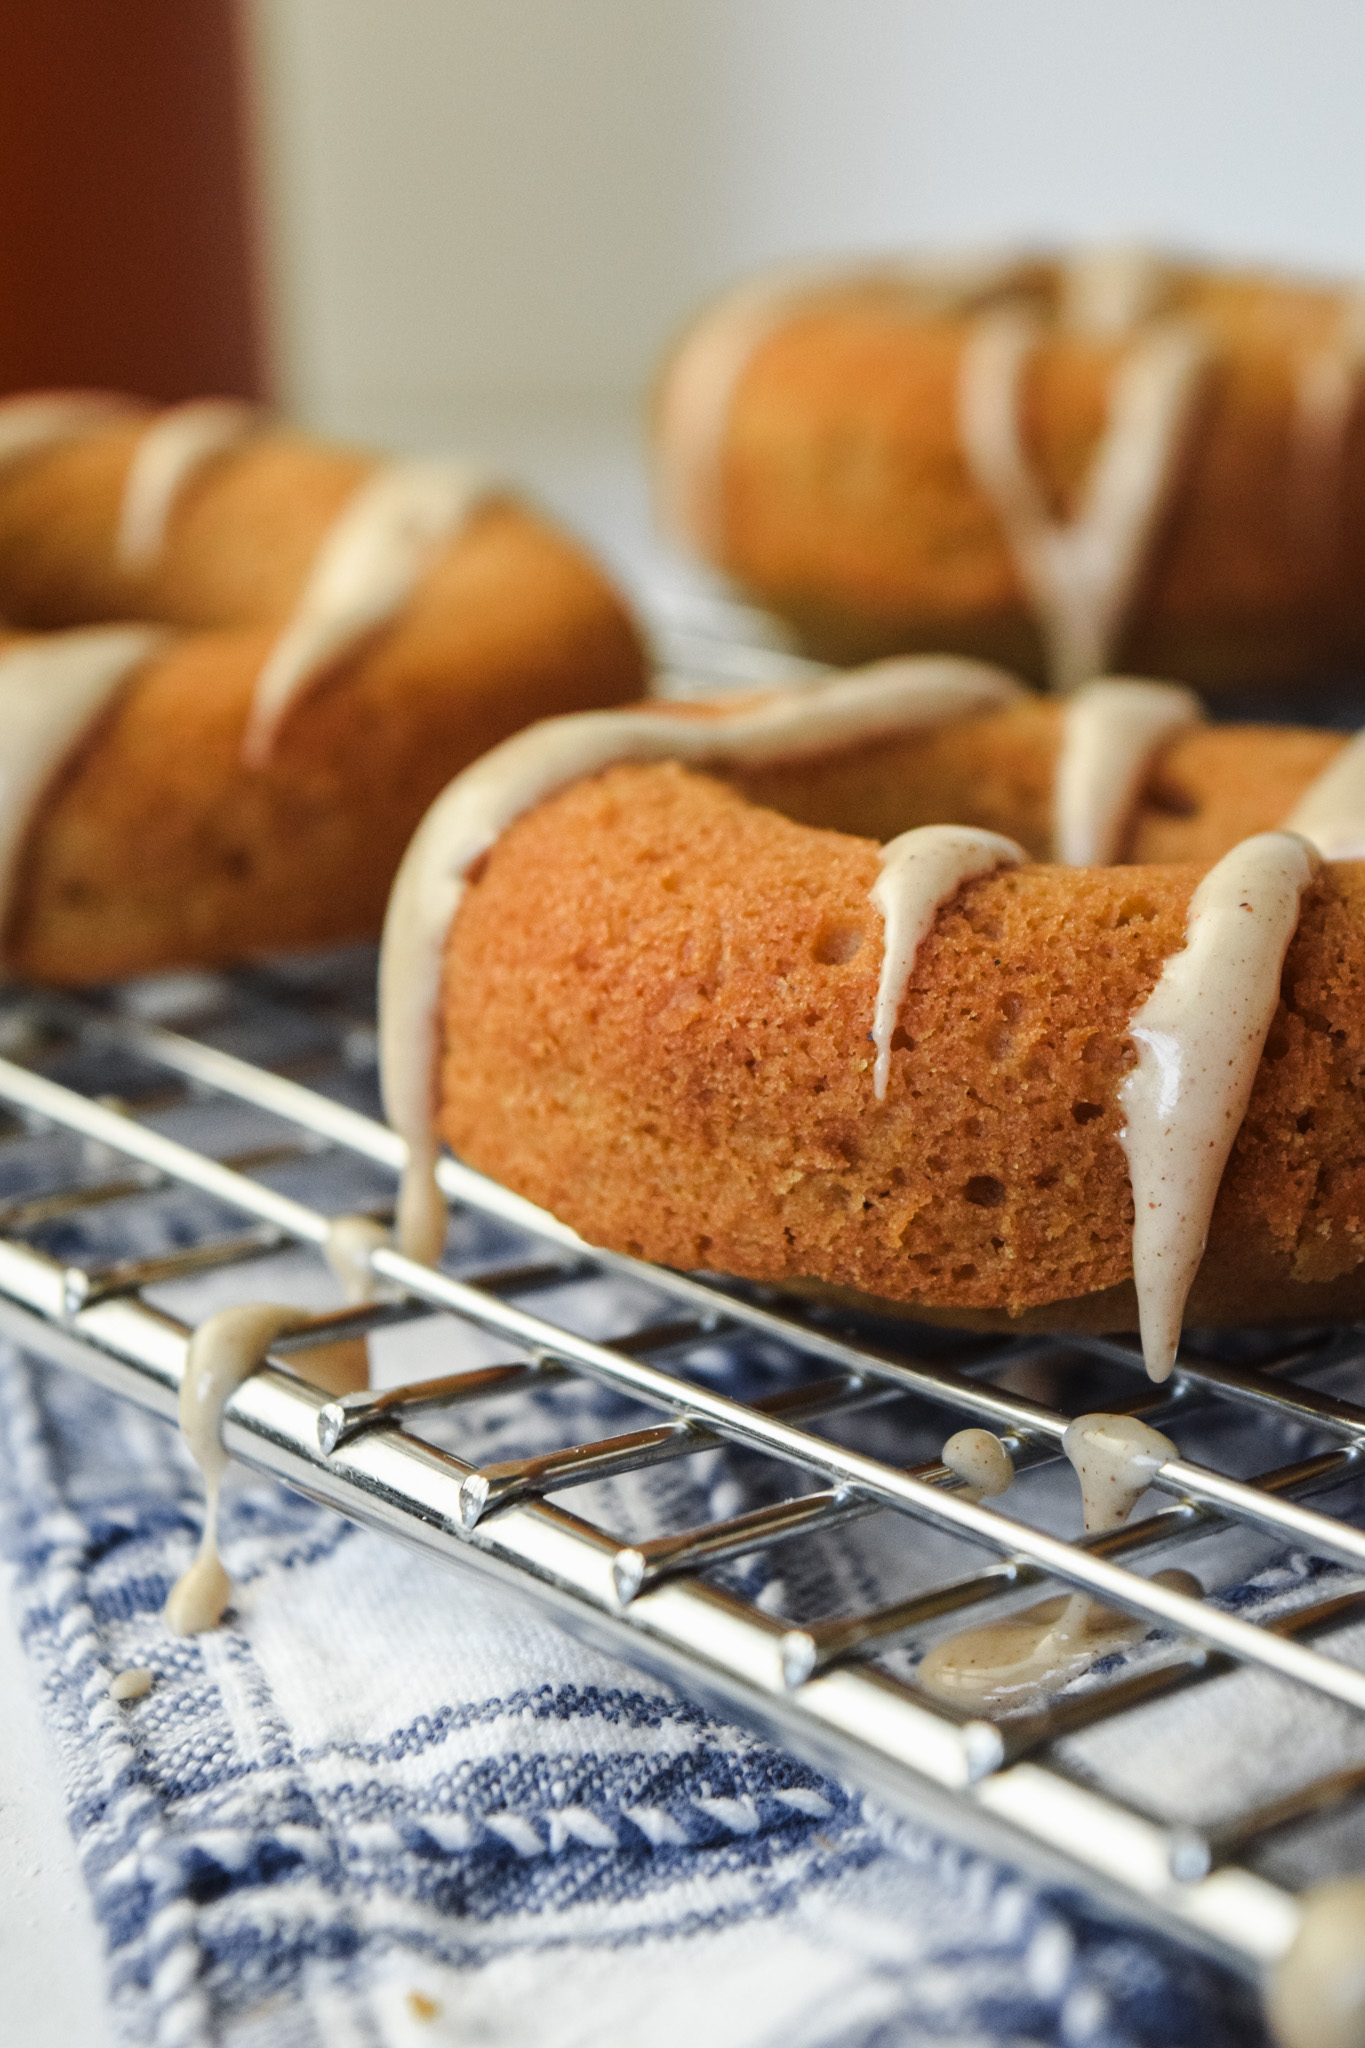 Gluten Free Baked Apple Cider Doughnuts with a Sweet Cinnamon Glaze